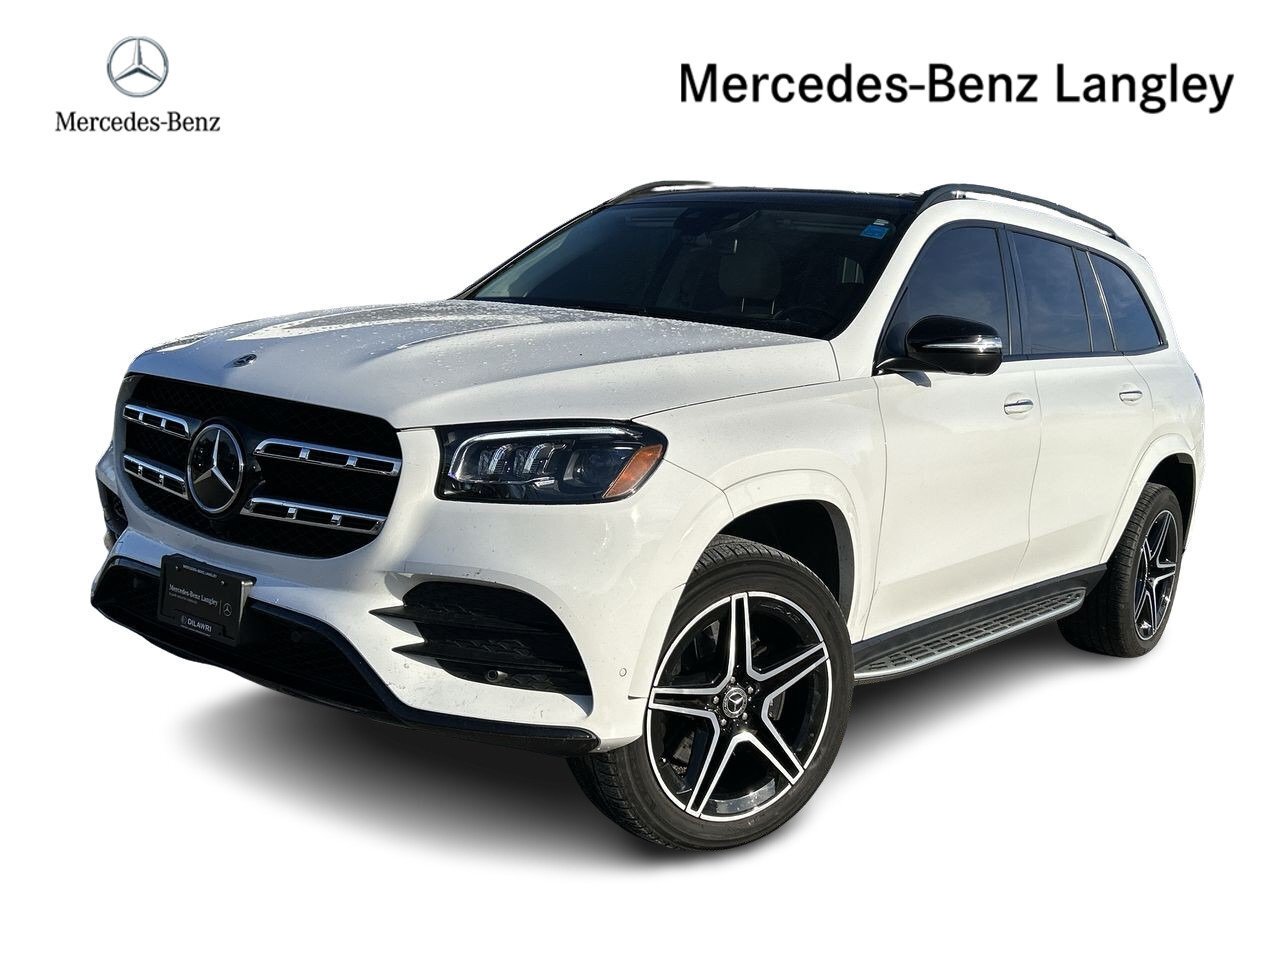 2022 Mercedes-Benz GLS450 4MATIC SUV room for the whole gang!